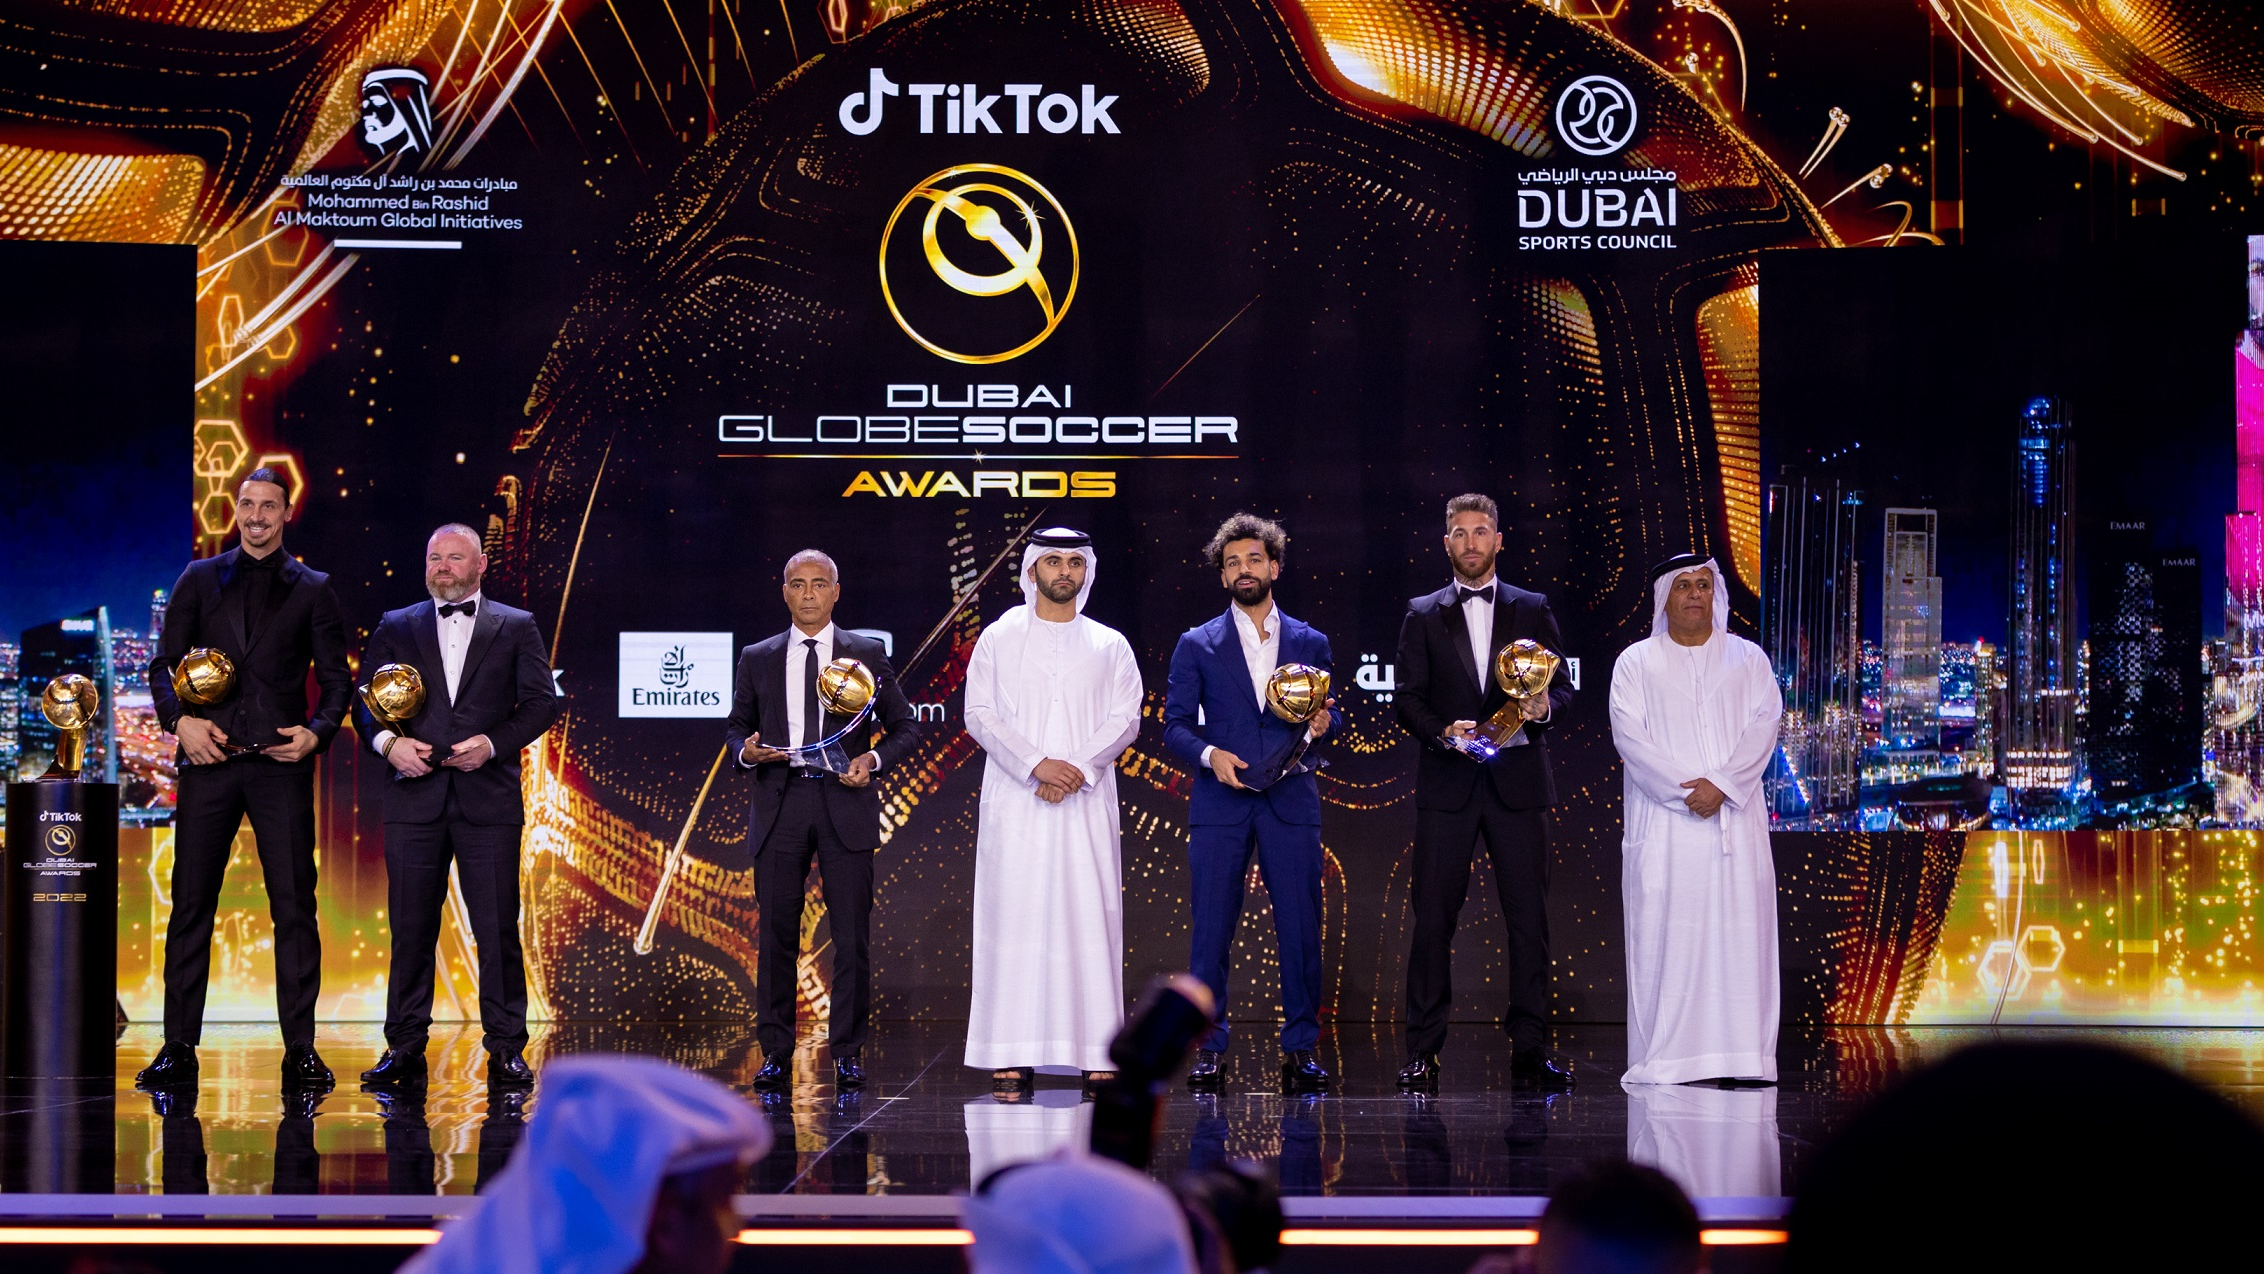 https://adgully.me/post/2510/globe-soccer-unveils-plans-for-road-to-dubai